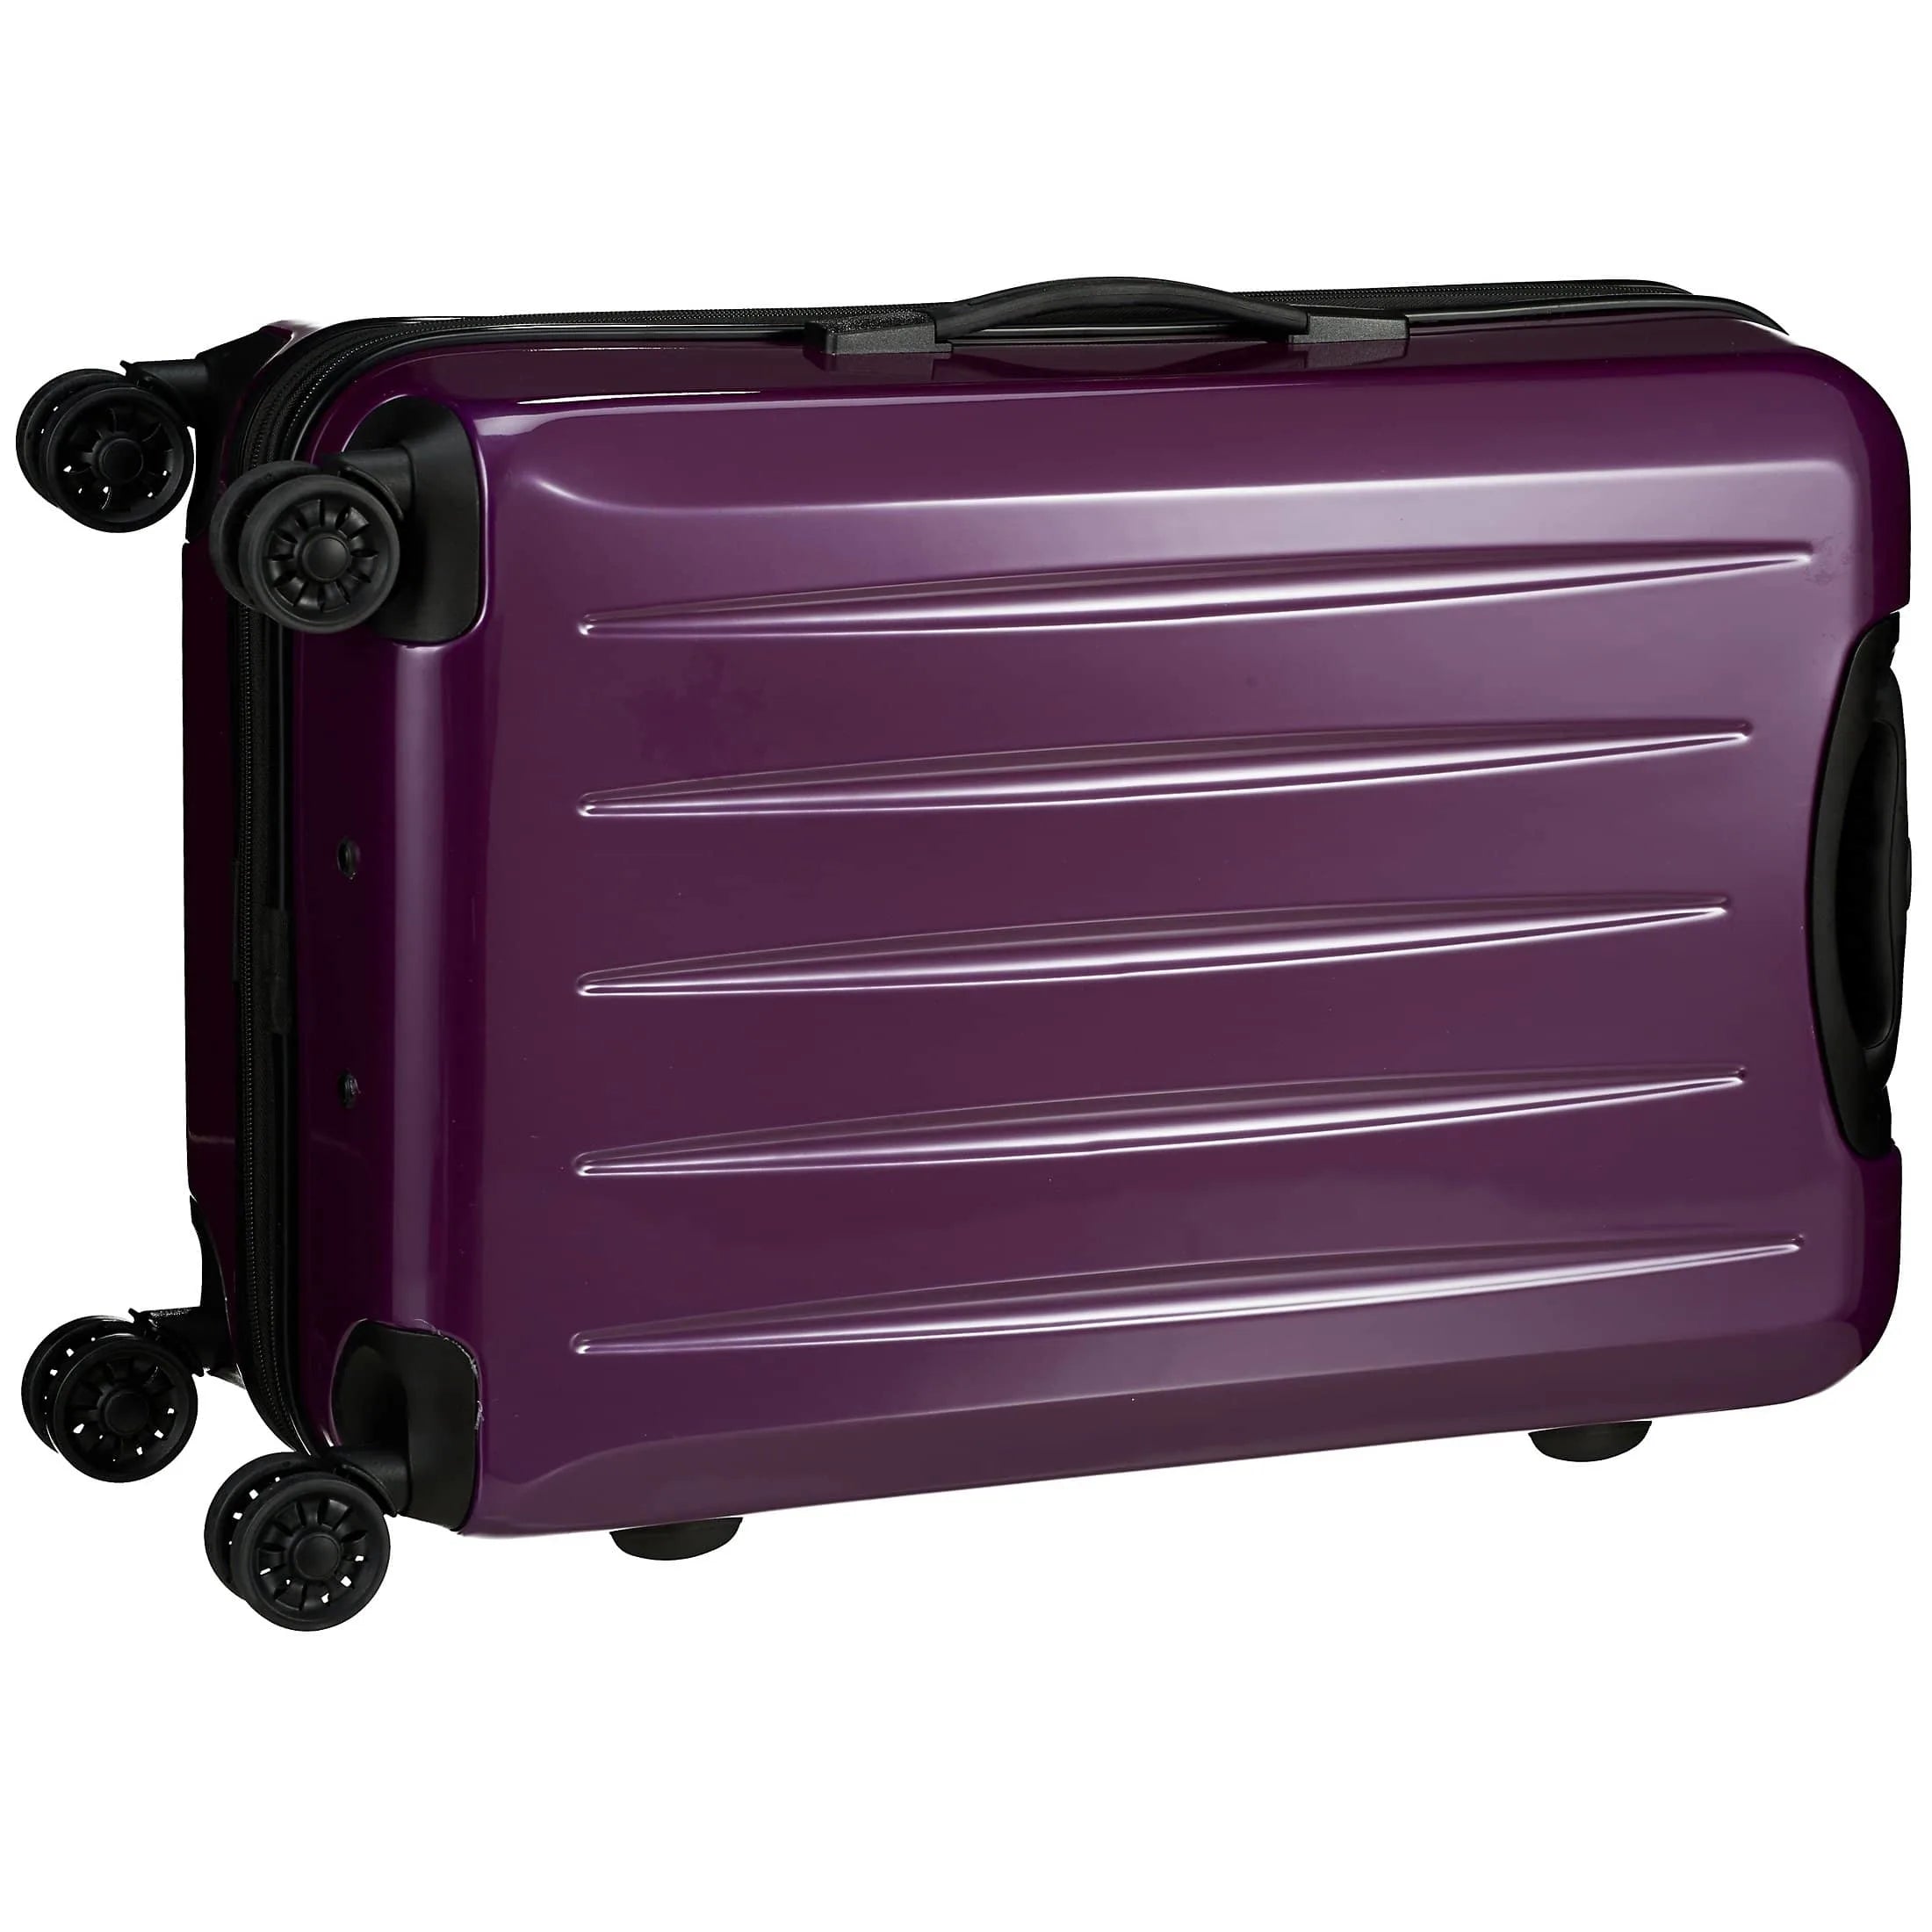 Check In London 2.0 trolley 4 roues 67 cm - violet